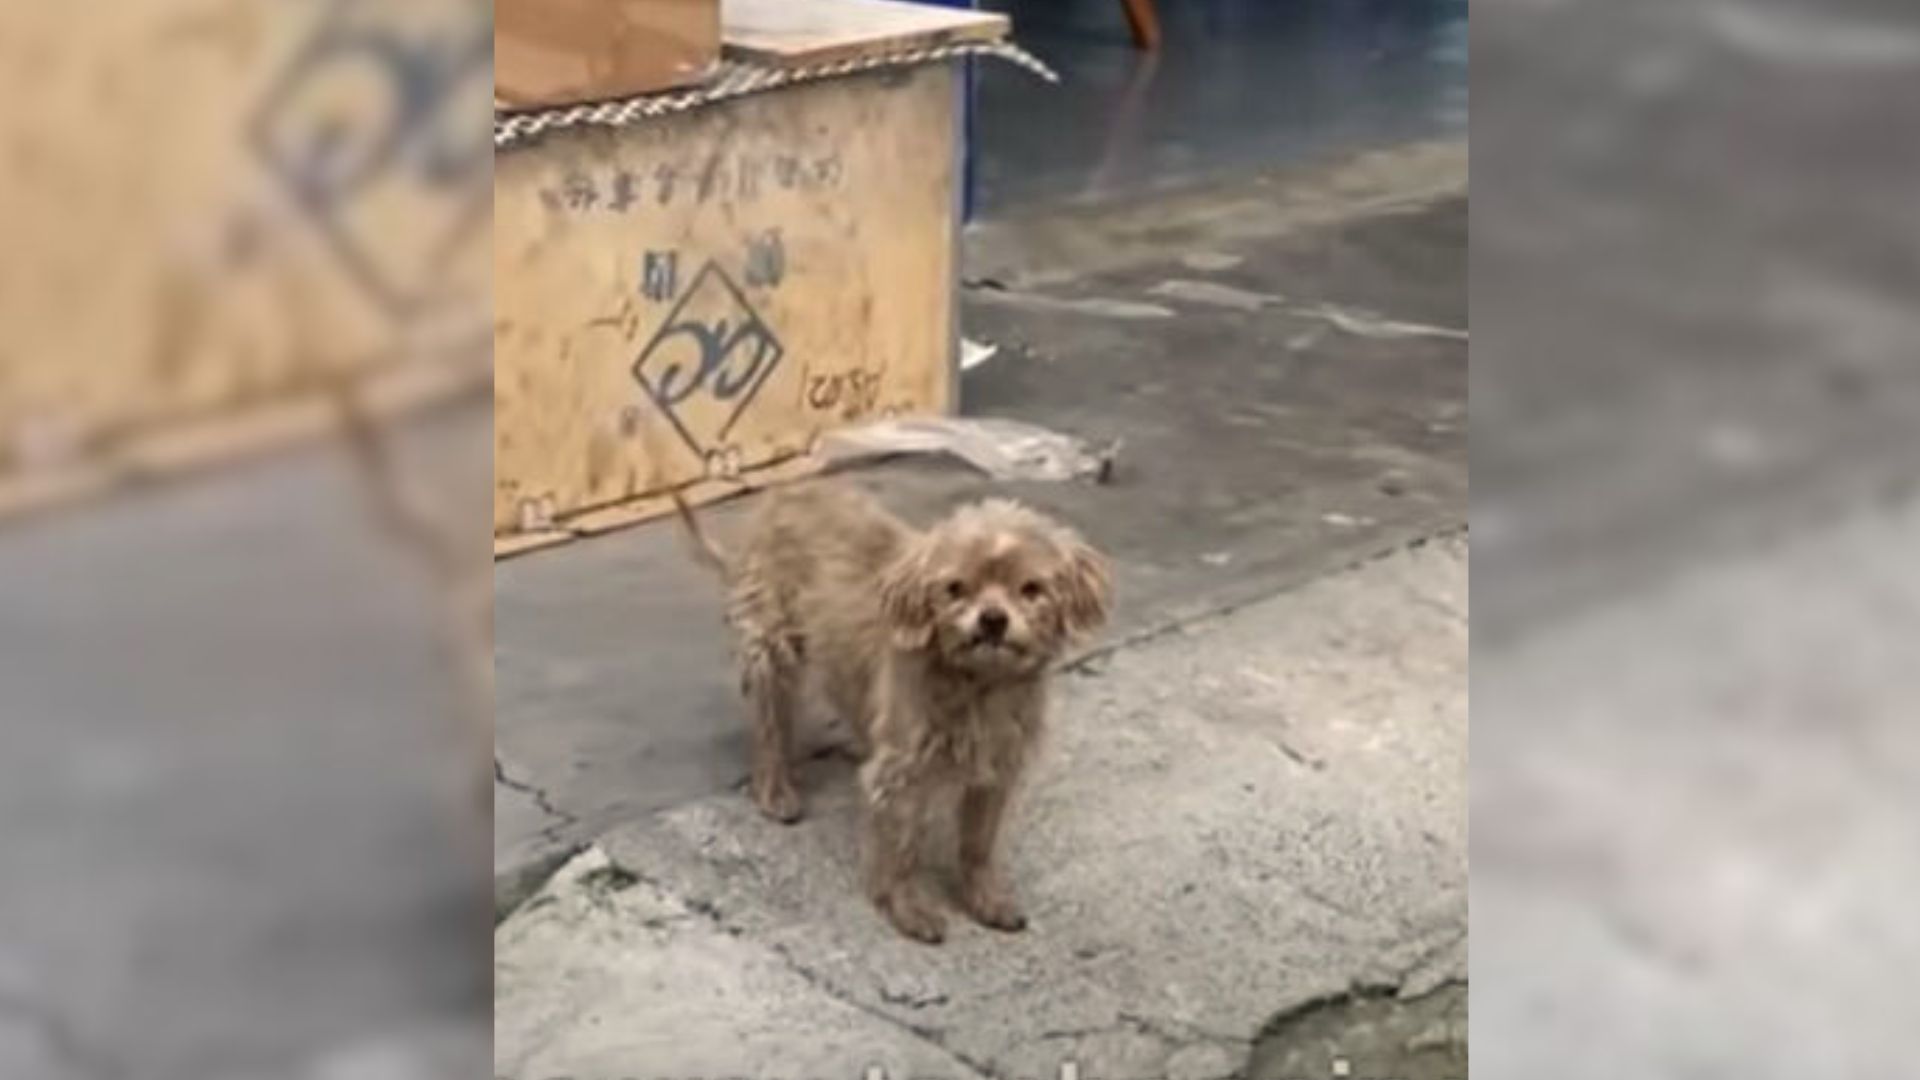 The Sad Pup Who Begged For Help In Front Of A Store Greets His Rescuer With A Smile